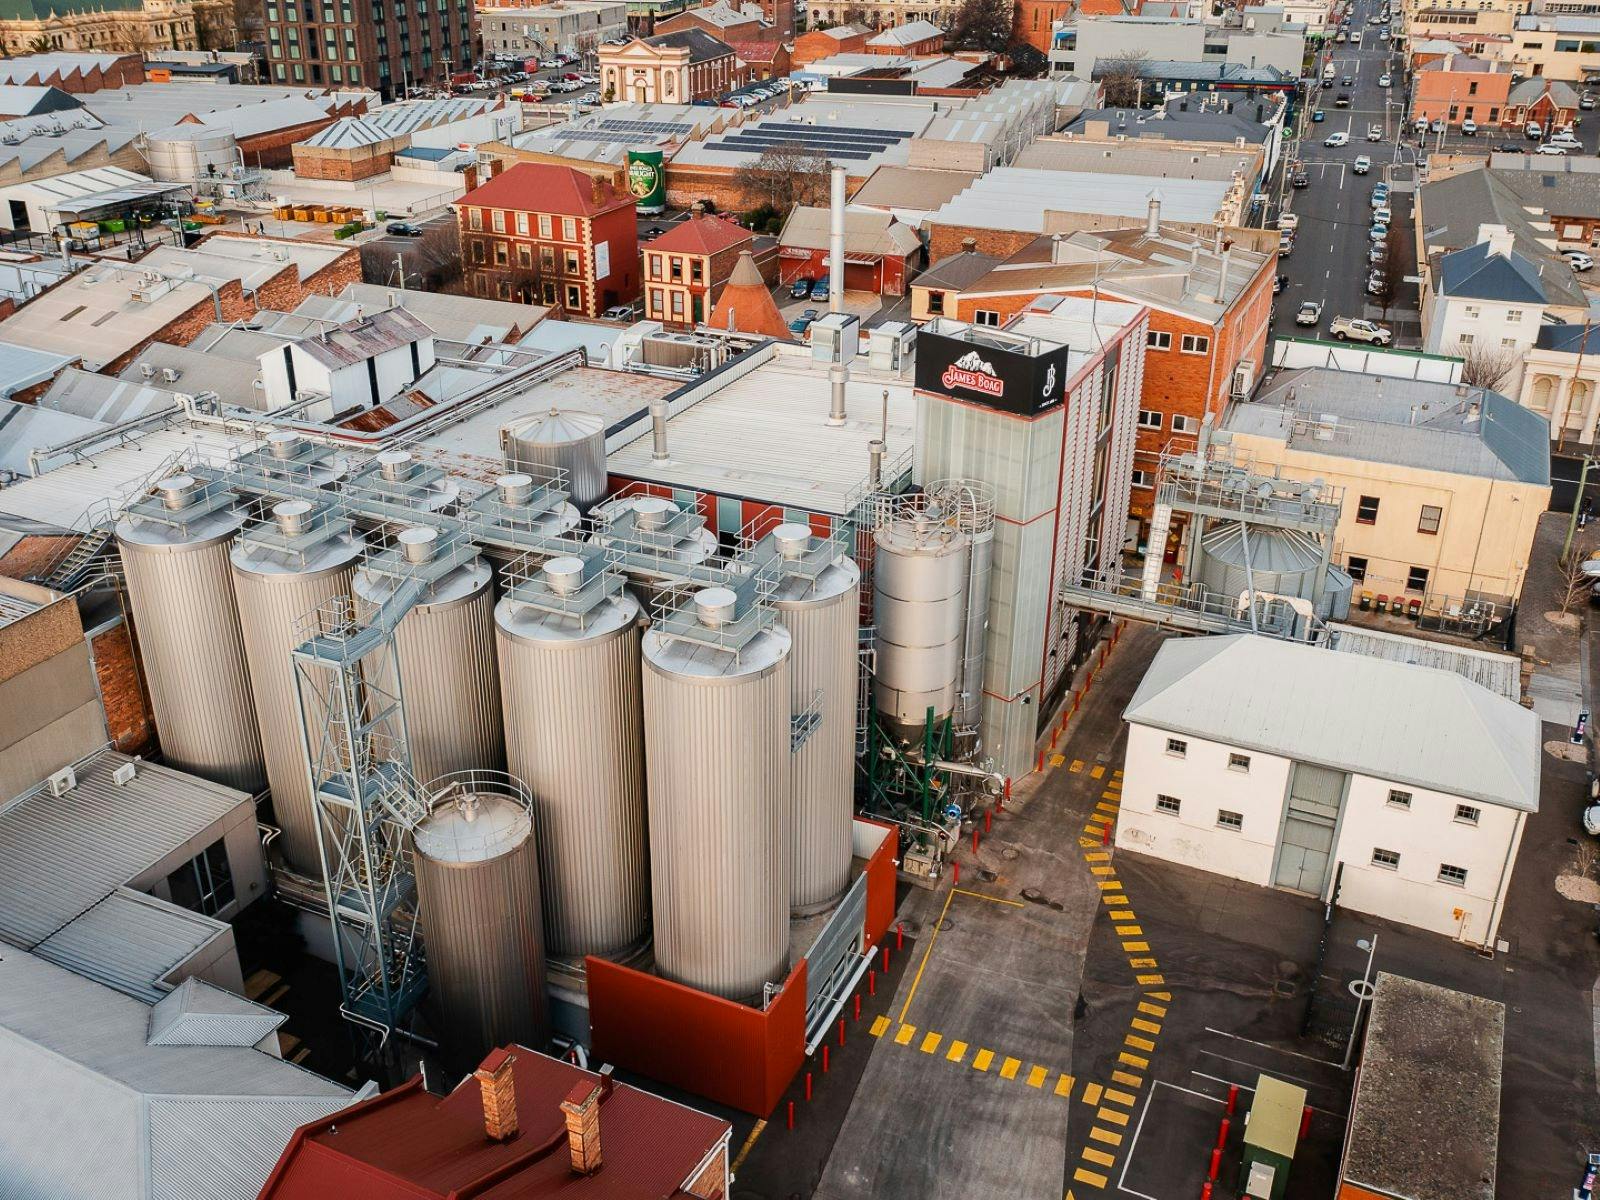 A drone shot of the brewery from very high.